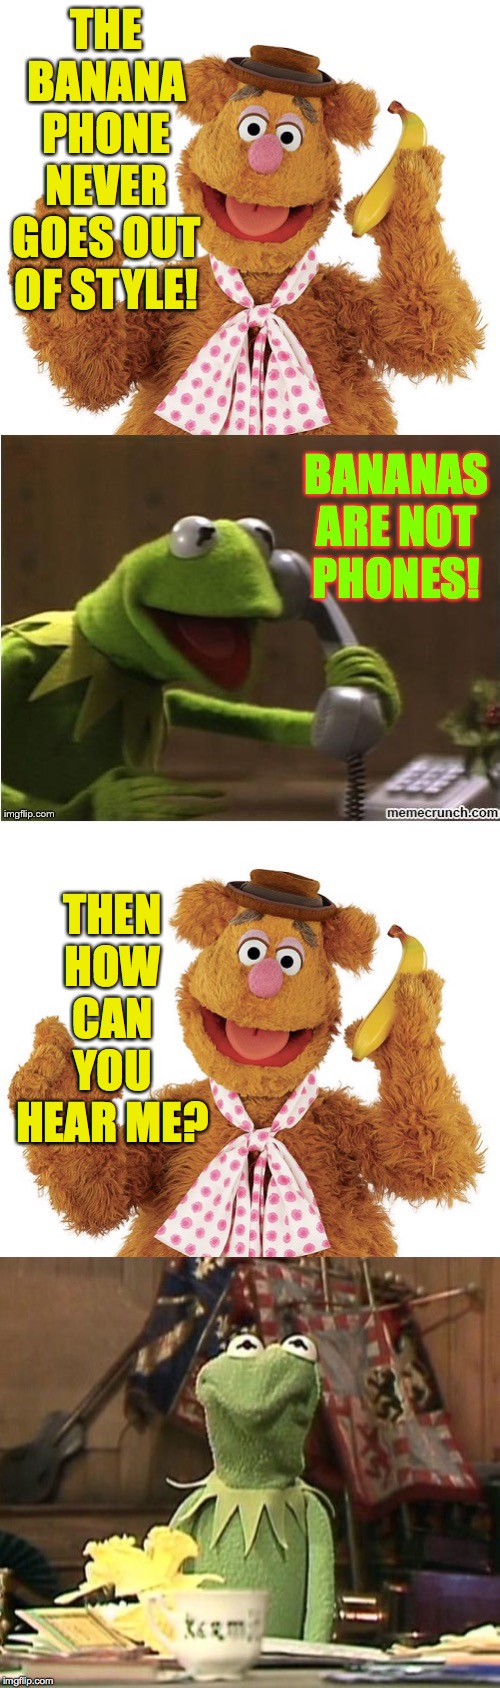 Fozzie Banana Call | THE BANANA PHONE NEVER GOES OUT OF STYLE! THEN HOW CAN YOU HEAR ME? BANANAS ARE NOT PHONES! | image tagged in fozzie banana call | made w/ Imgflip meme maker